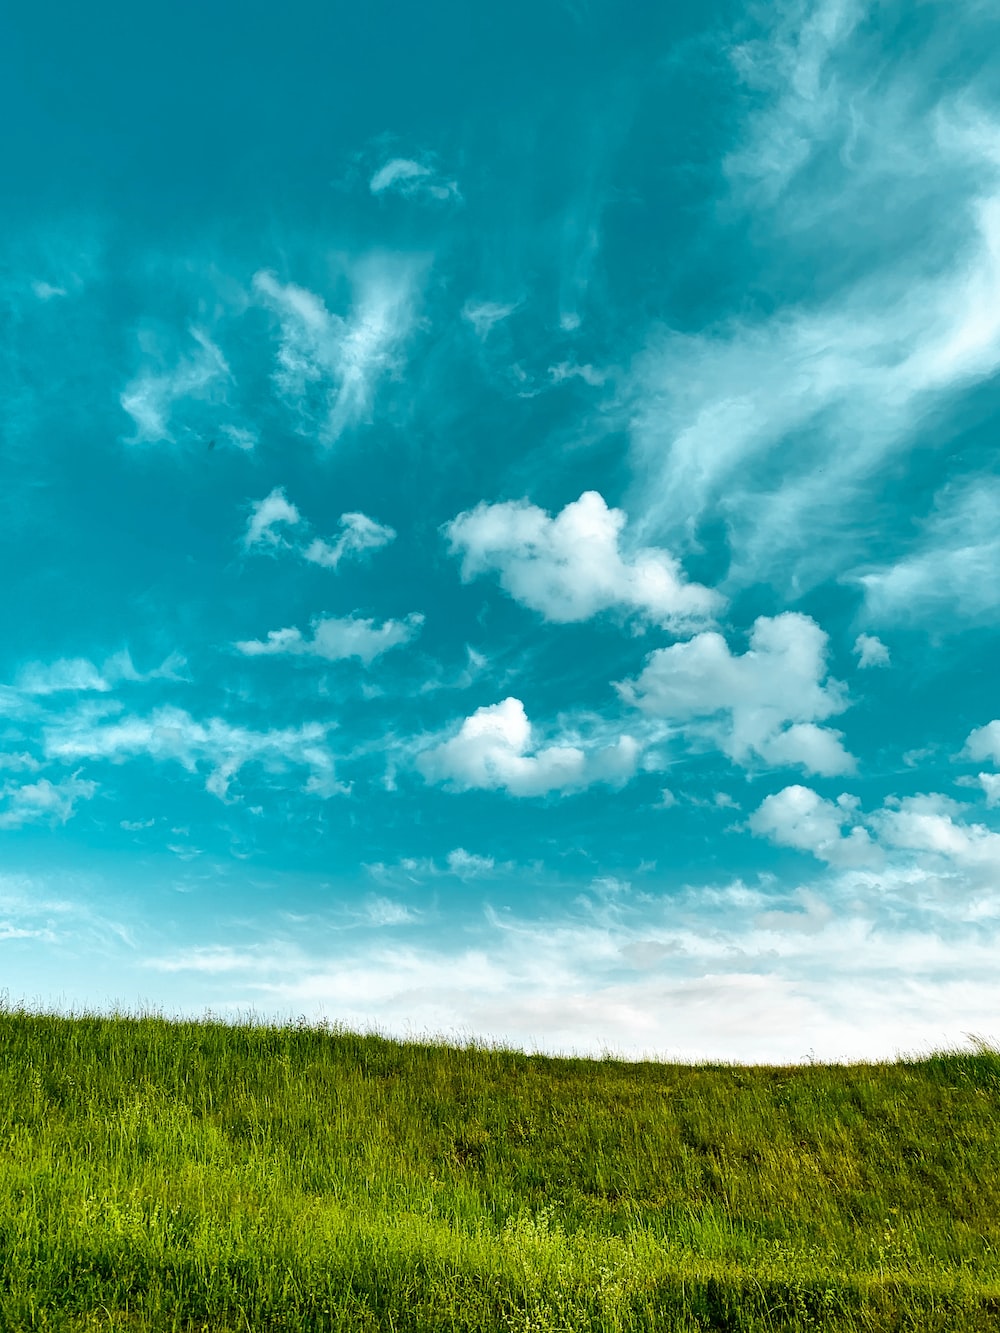 Grass And Sky Picture. Download Free Image